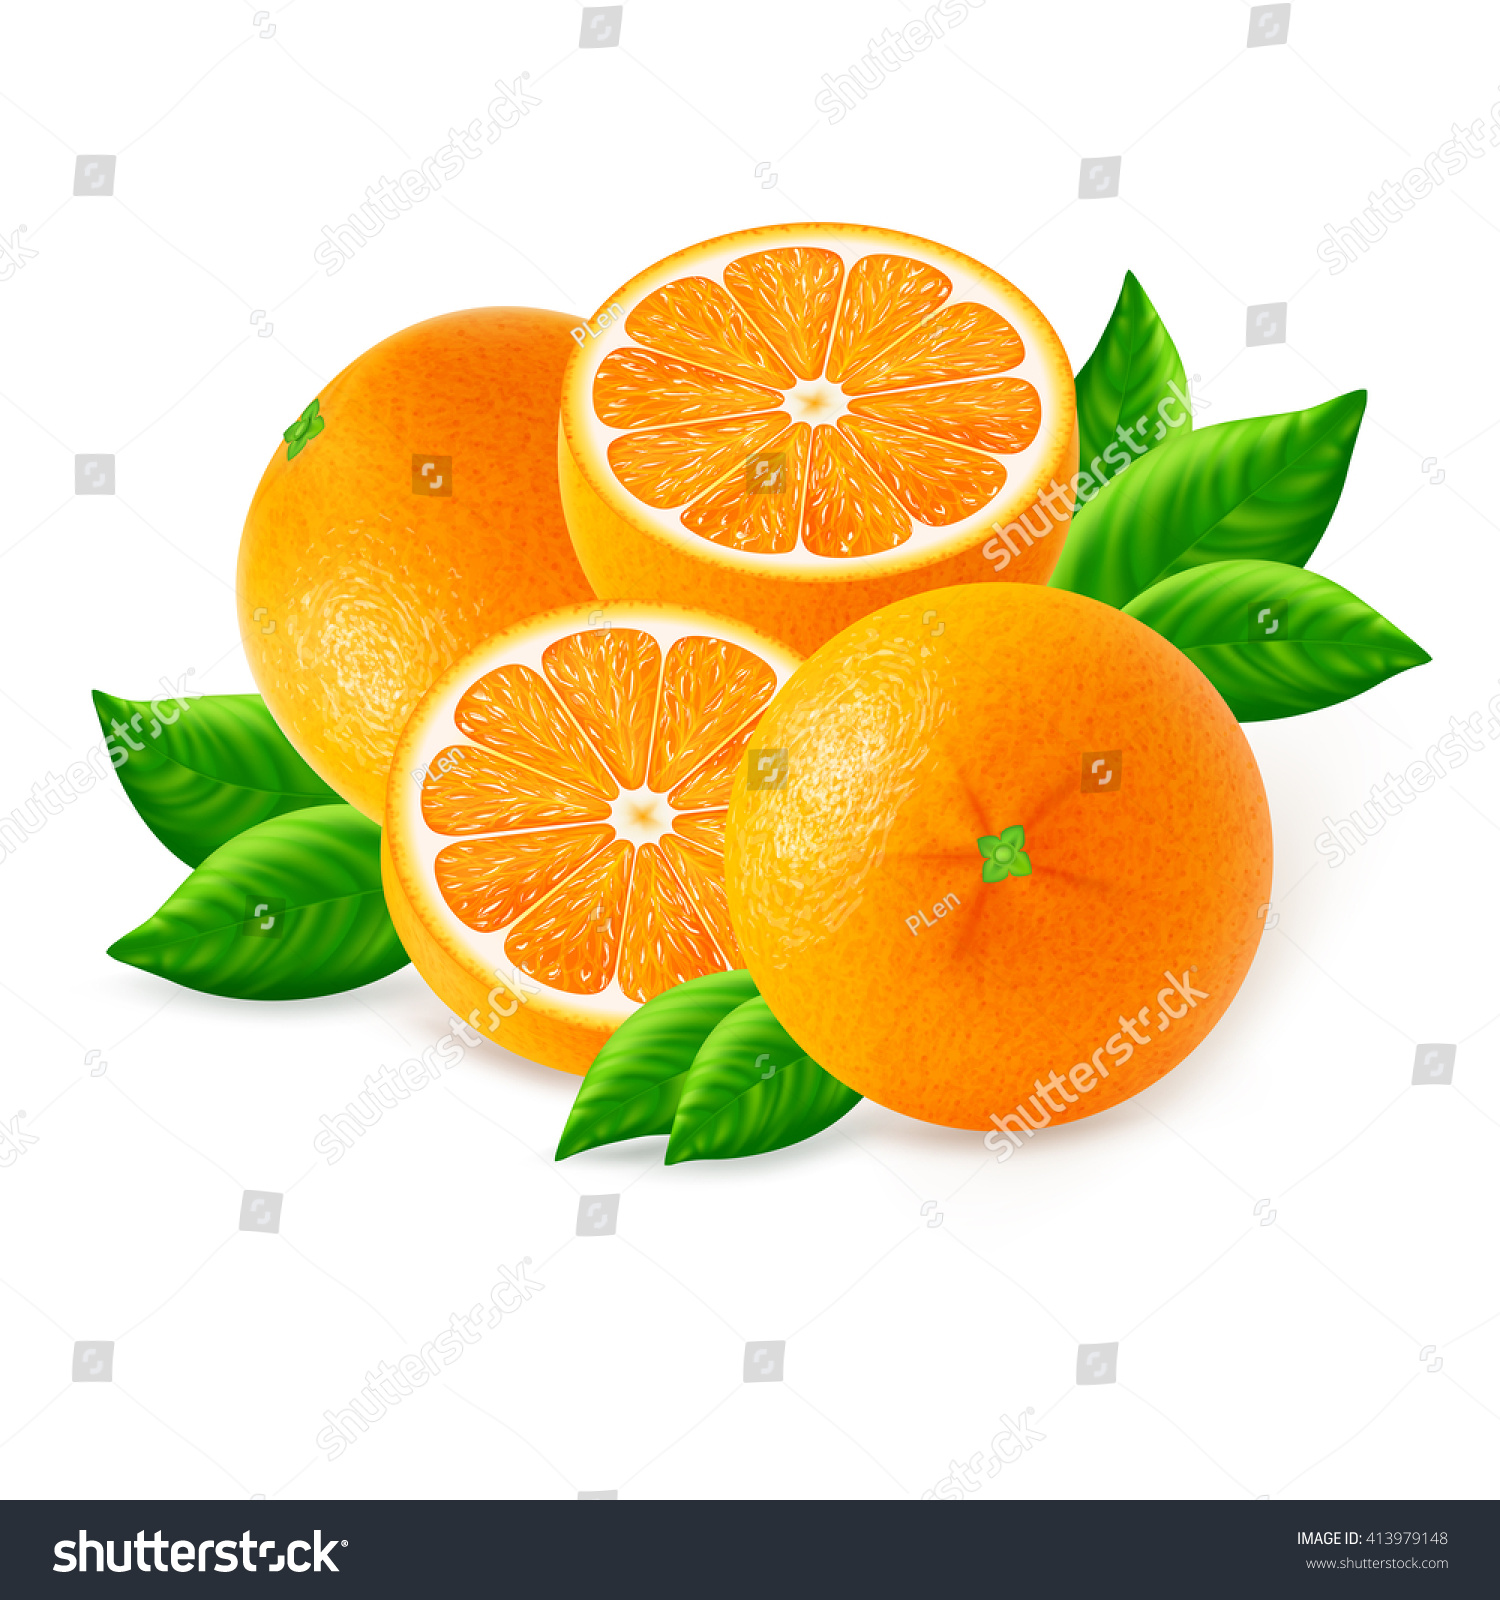 Ripe Oranges Fruits Slices Leaf Isolated Stock Vector 413979148 ...